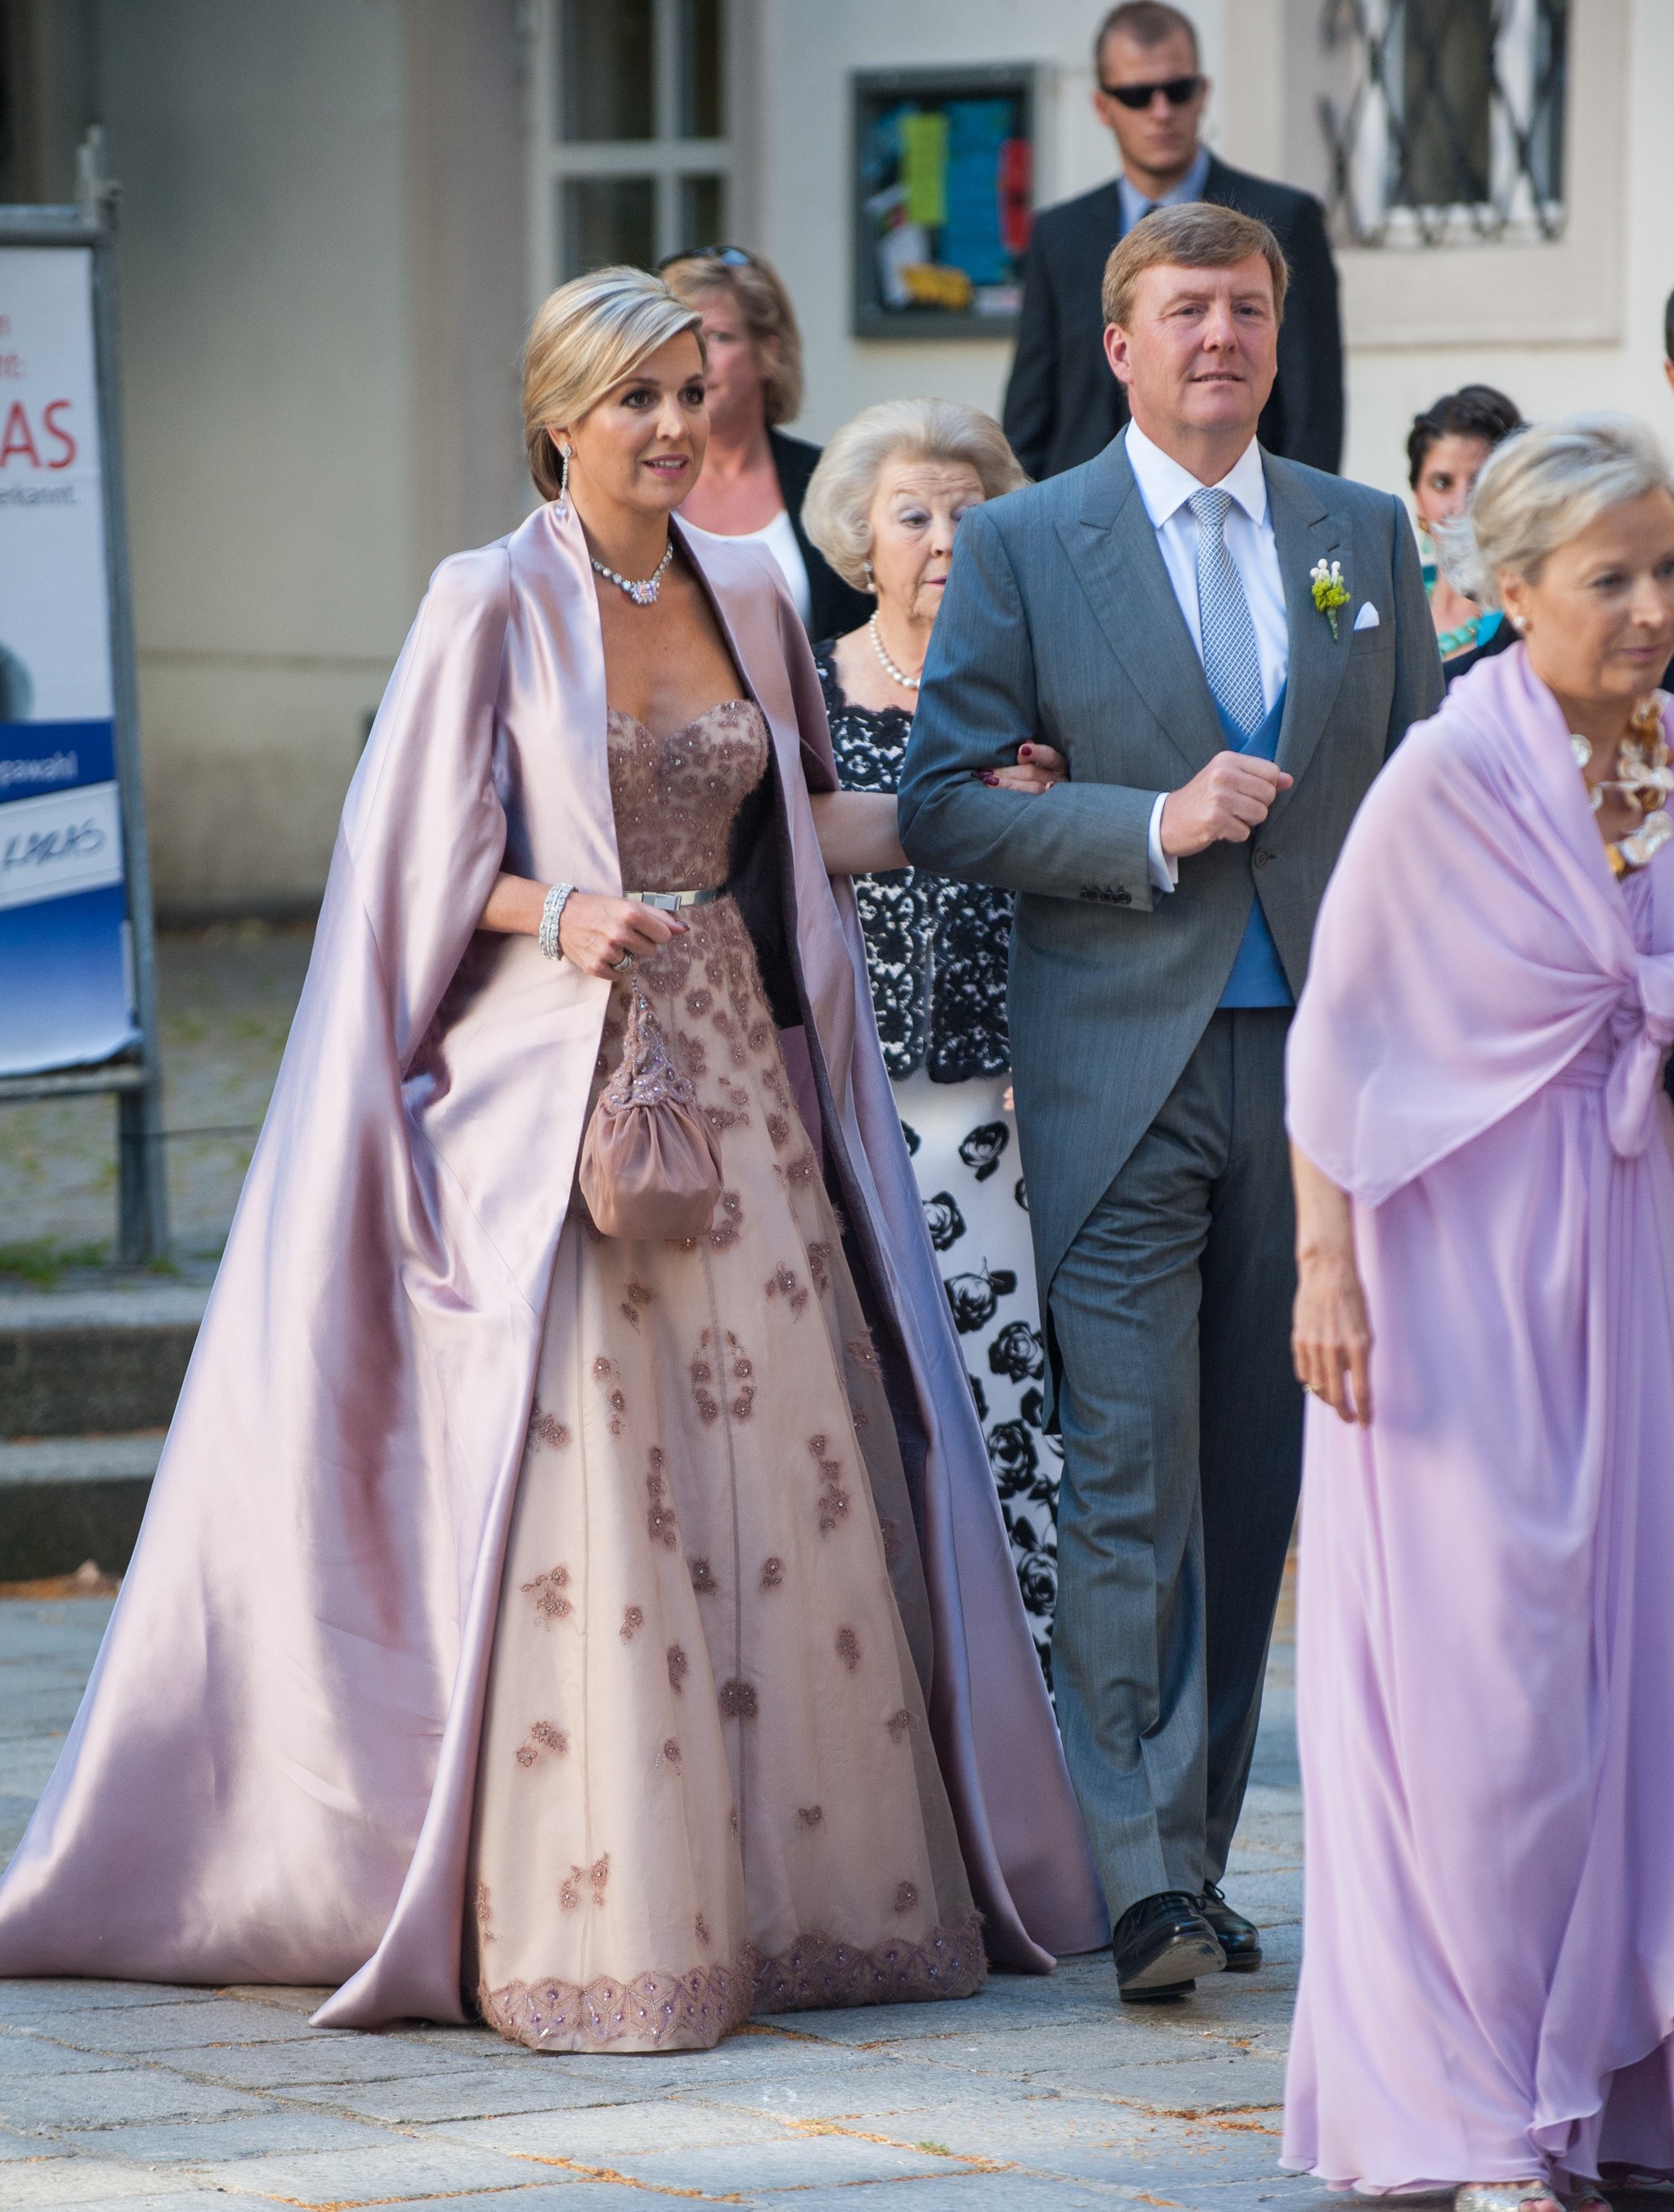 12 Royal Wedding Guests Who (Almost) Outdressed the Bride